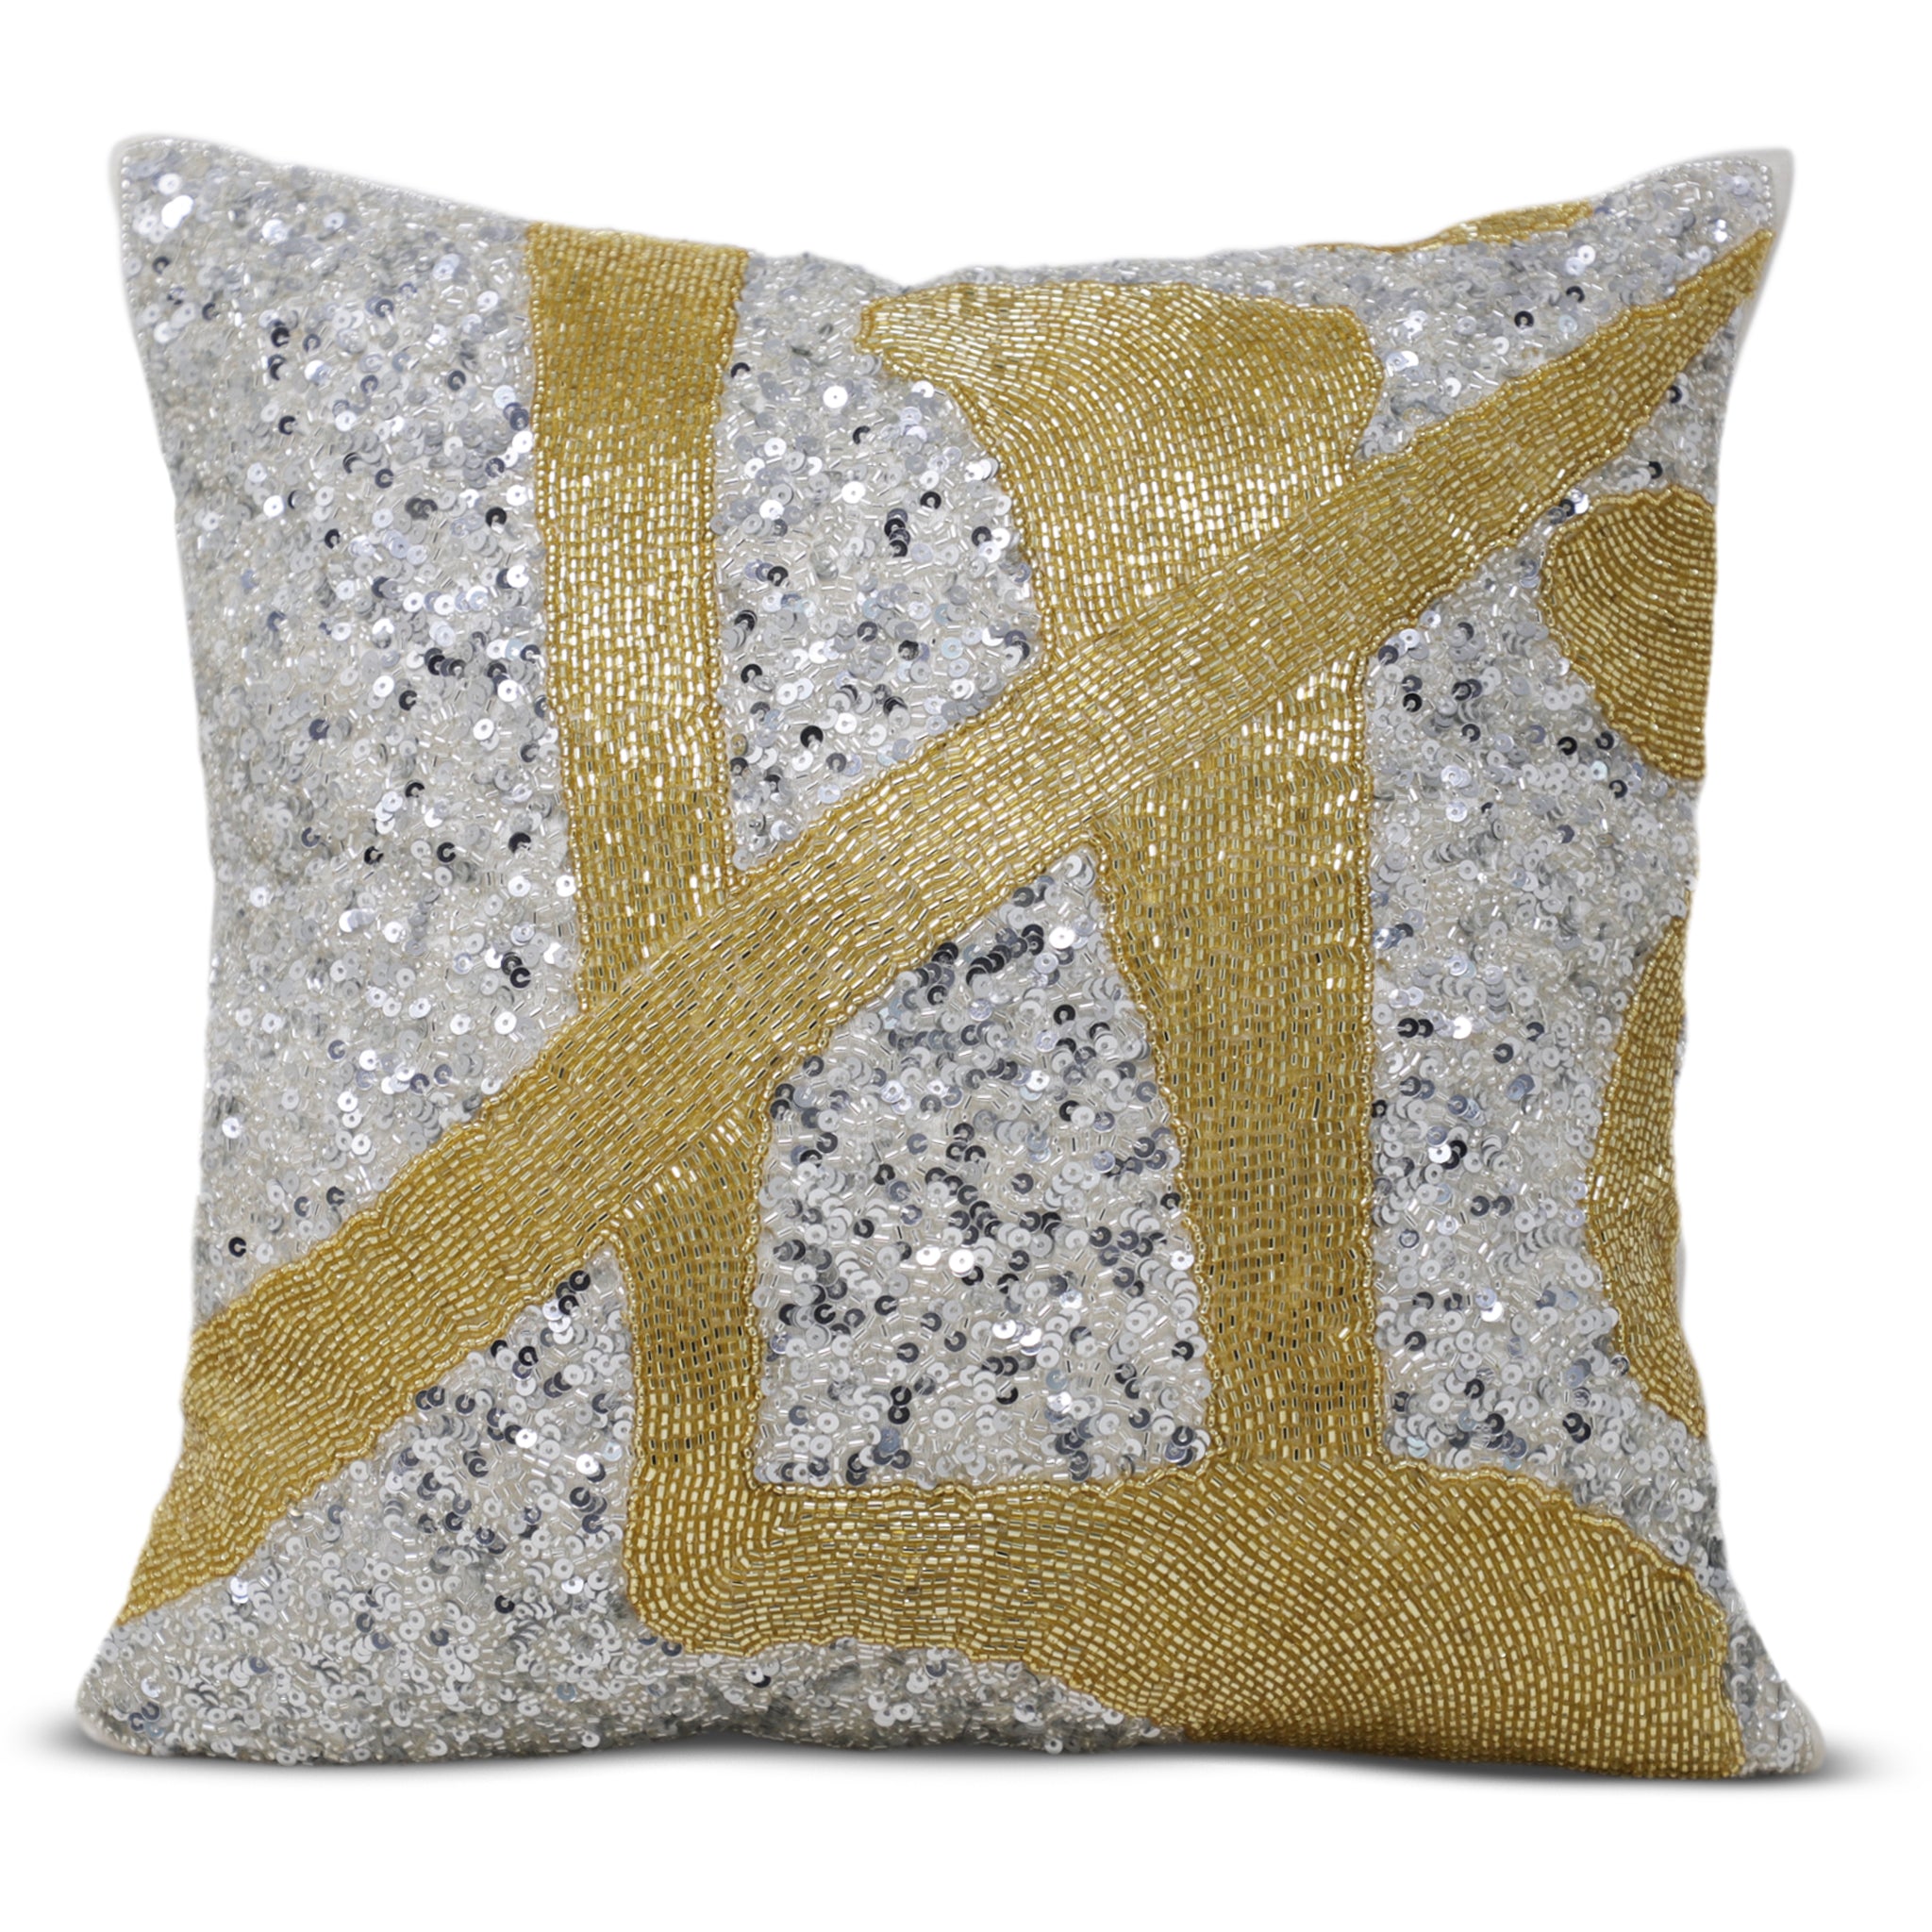 Ode To Japan - Gold Silver Beaded Pillow Cover, Gilver Beads Pillow Case